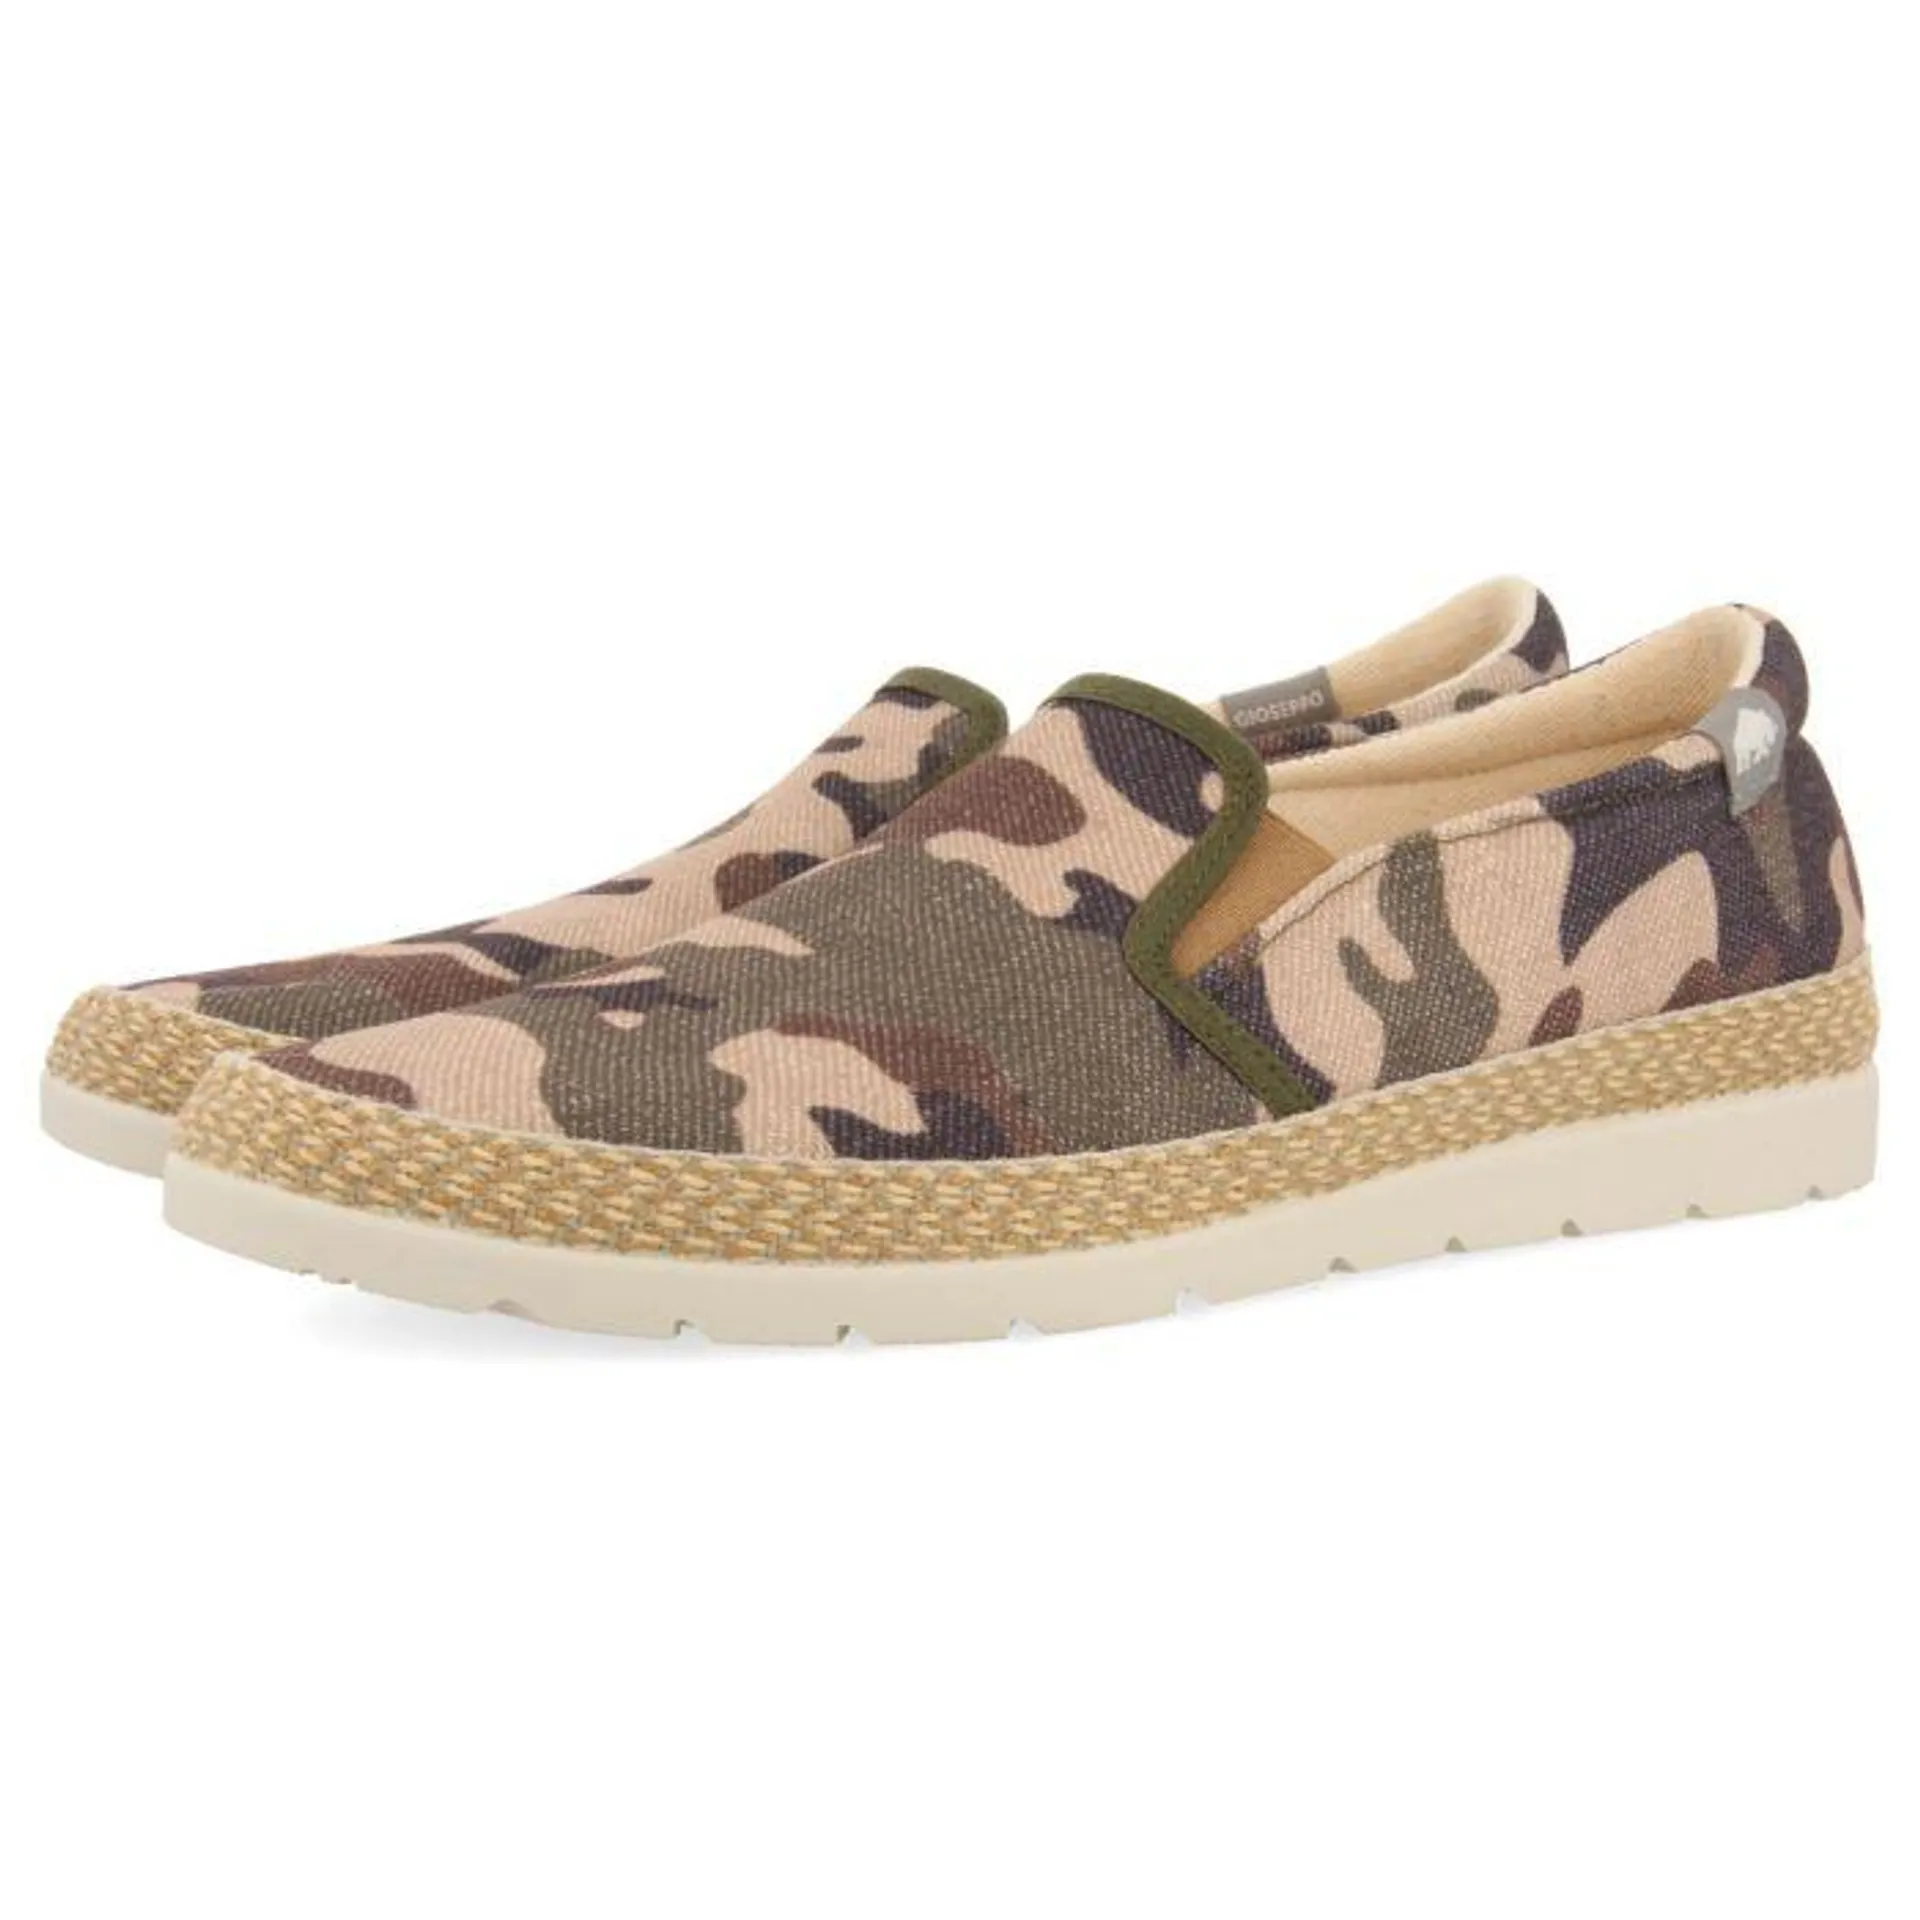 CAMOUFLAGE PRINT ESPADRILLES WITH RECYCLED COTTON FOR MEN VALRICO